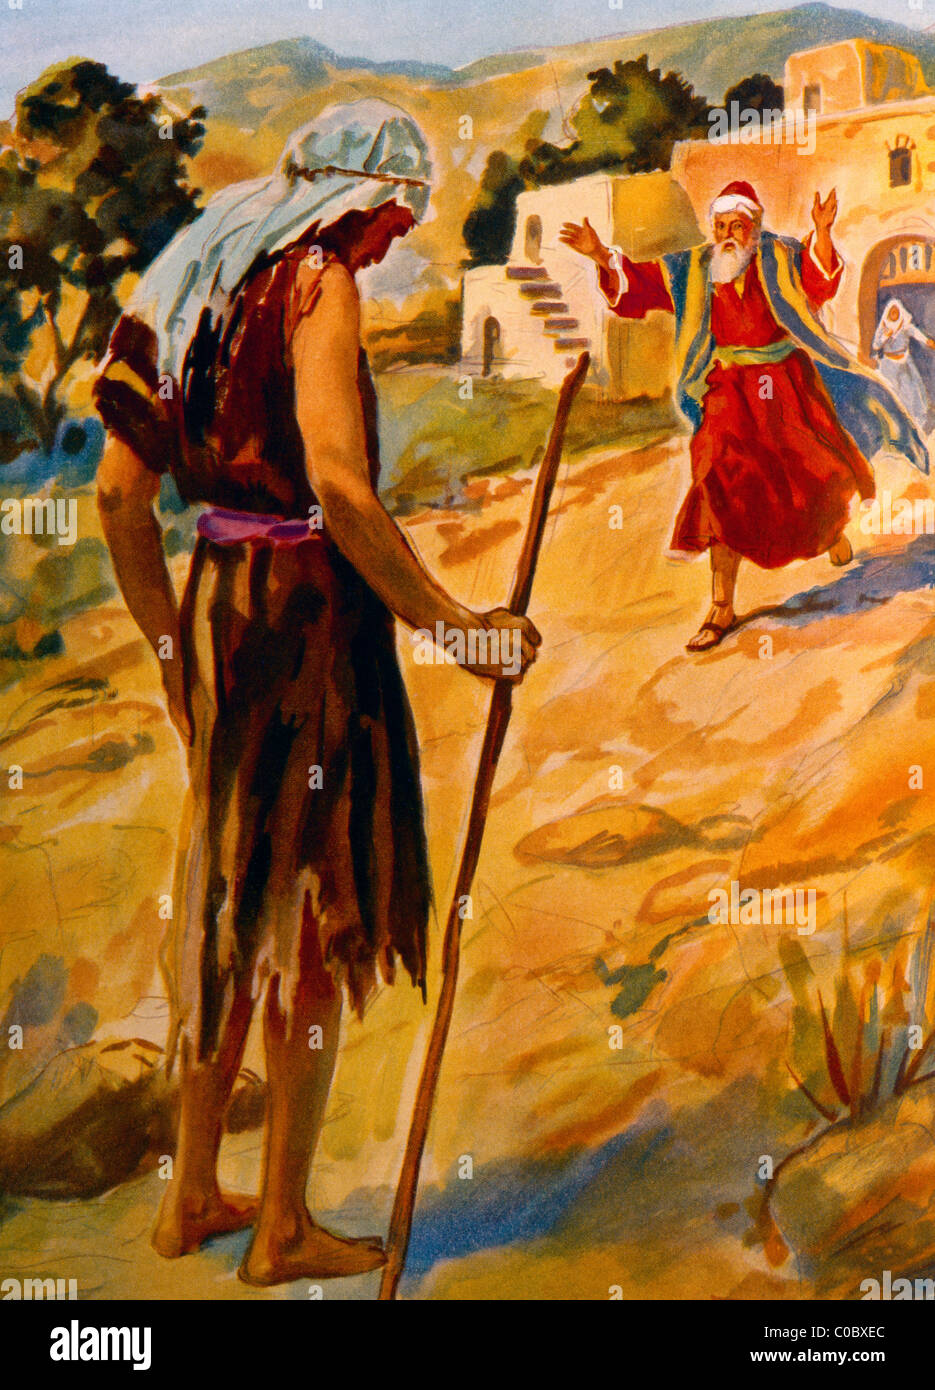 The Father Runs To Welcome Home His Wandering Son Painting By Henry Coller Bible Story Stock Photo